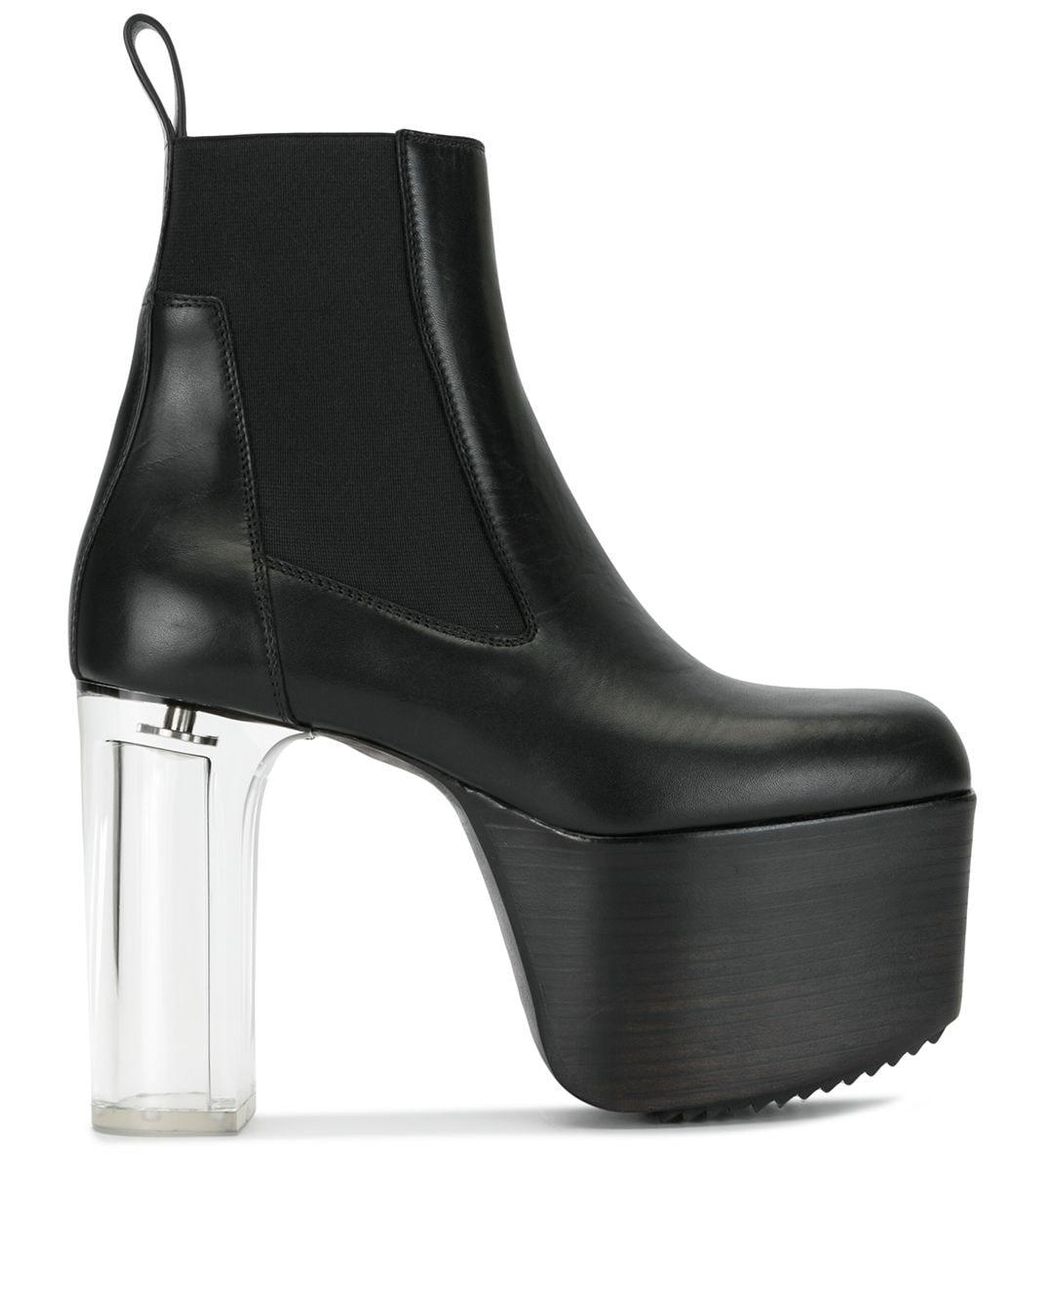 Rick Owens Leather Transparent Heel Boots in Black - Lyst